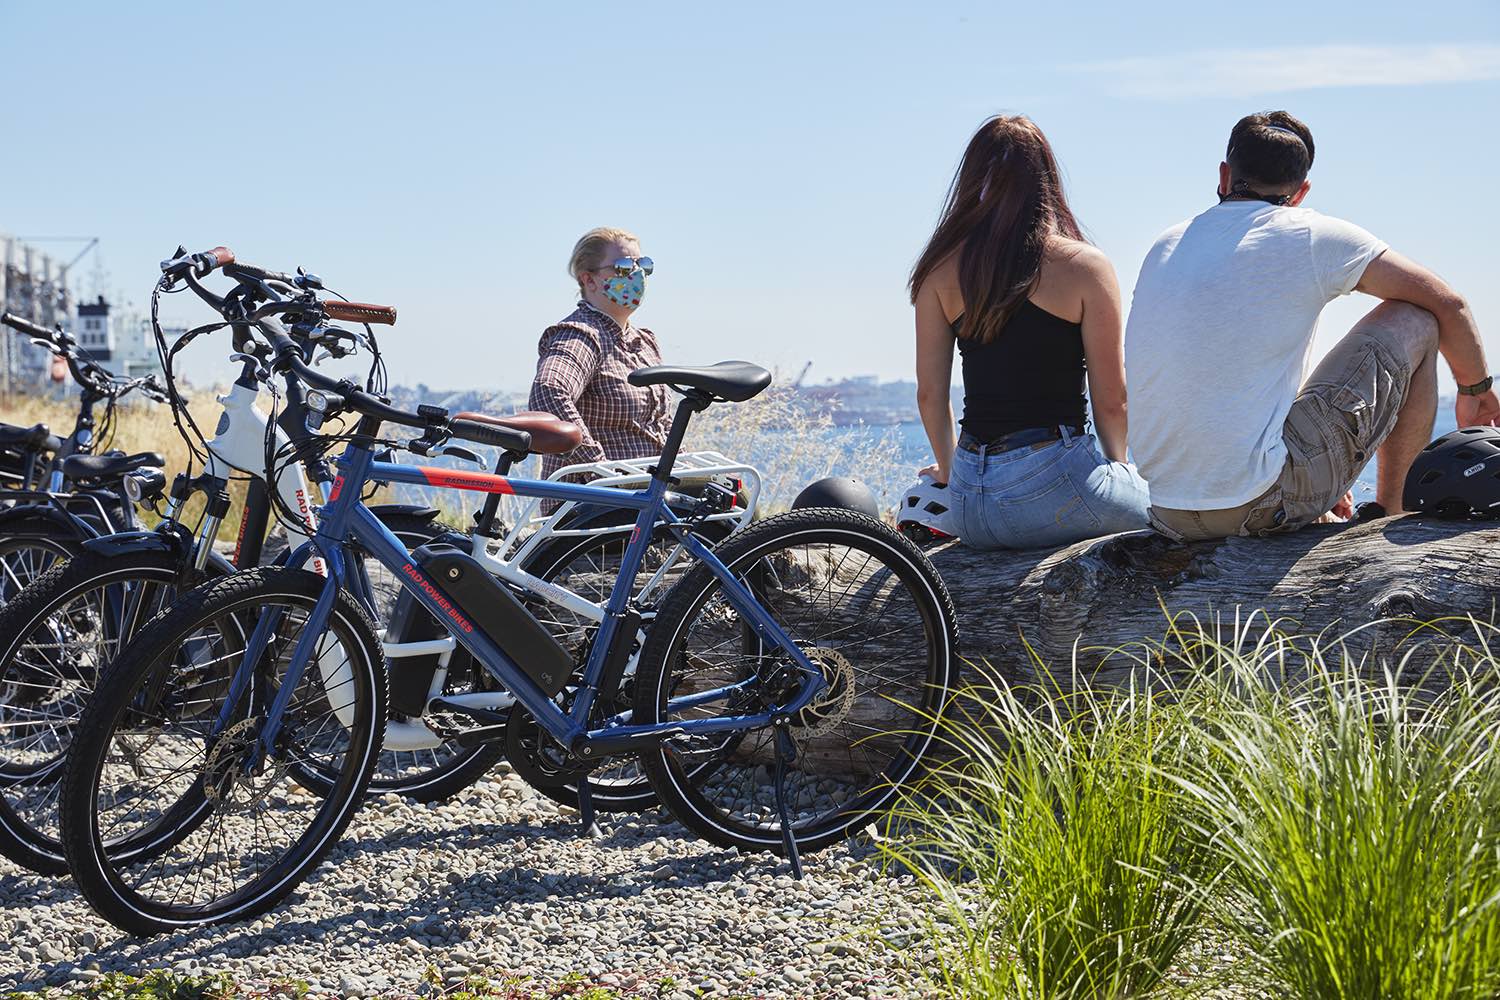 A group of friends meet along the beach, with their ebikes perched to the side.